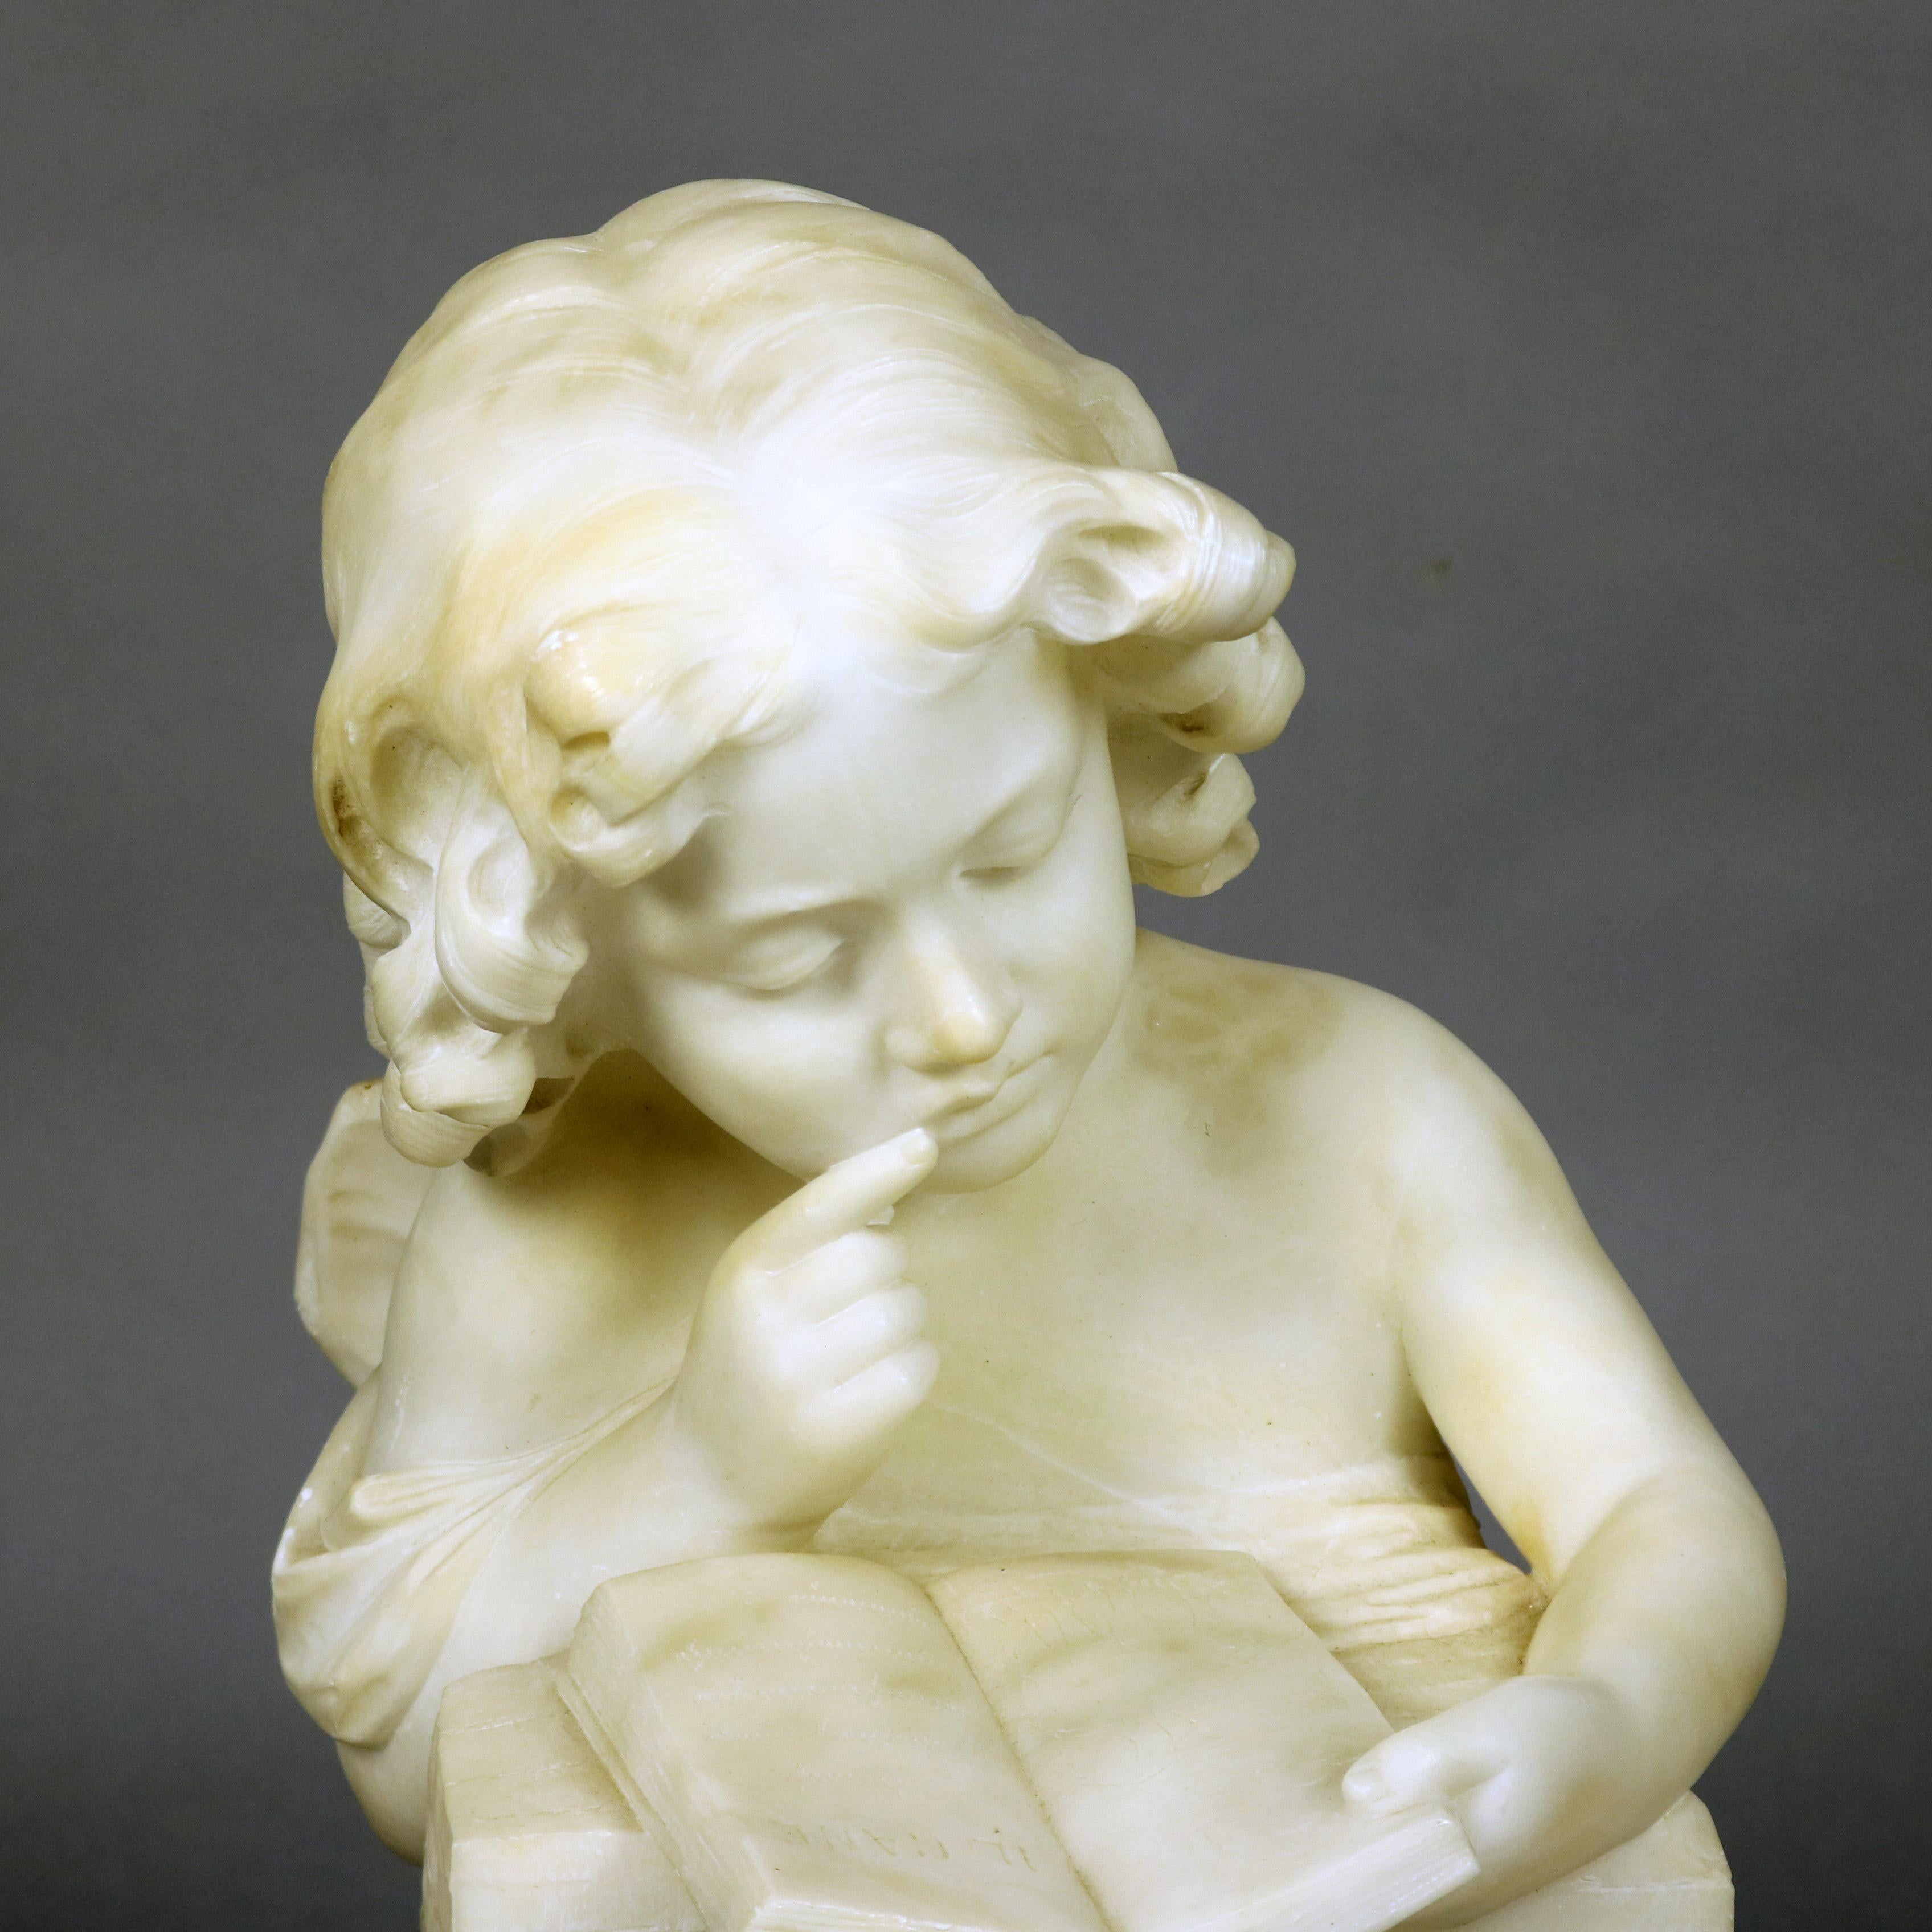 An antique French Volterra Alabaster portrait sculpture depicts young girl with book, raised on circular plinth, en verso artist signed as photographed, circa 1890

Measures: 18.5